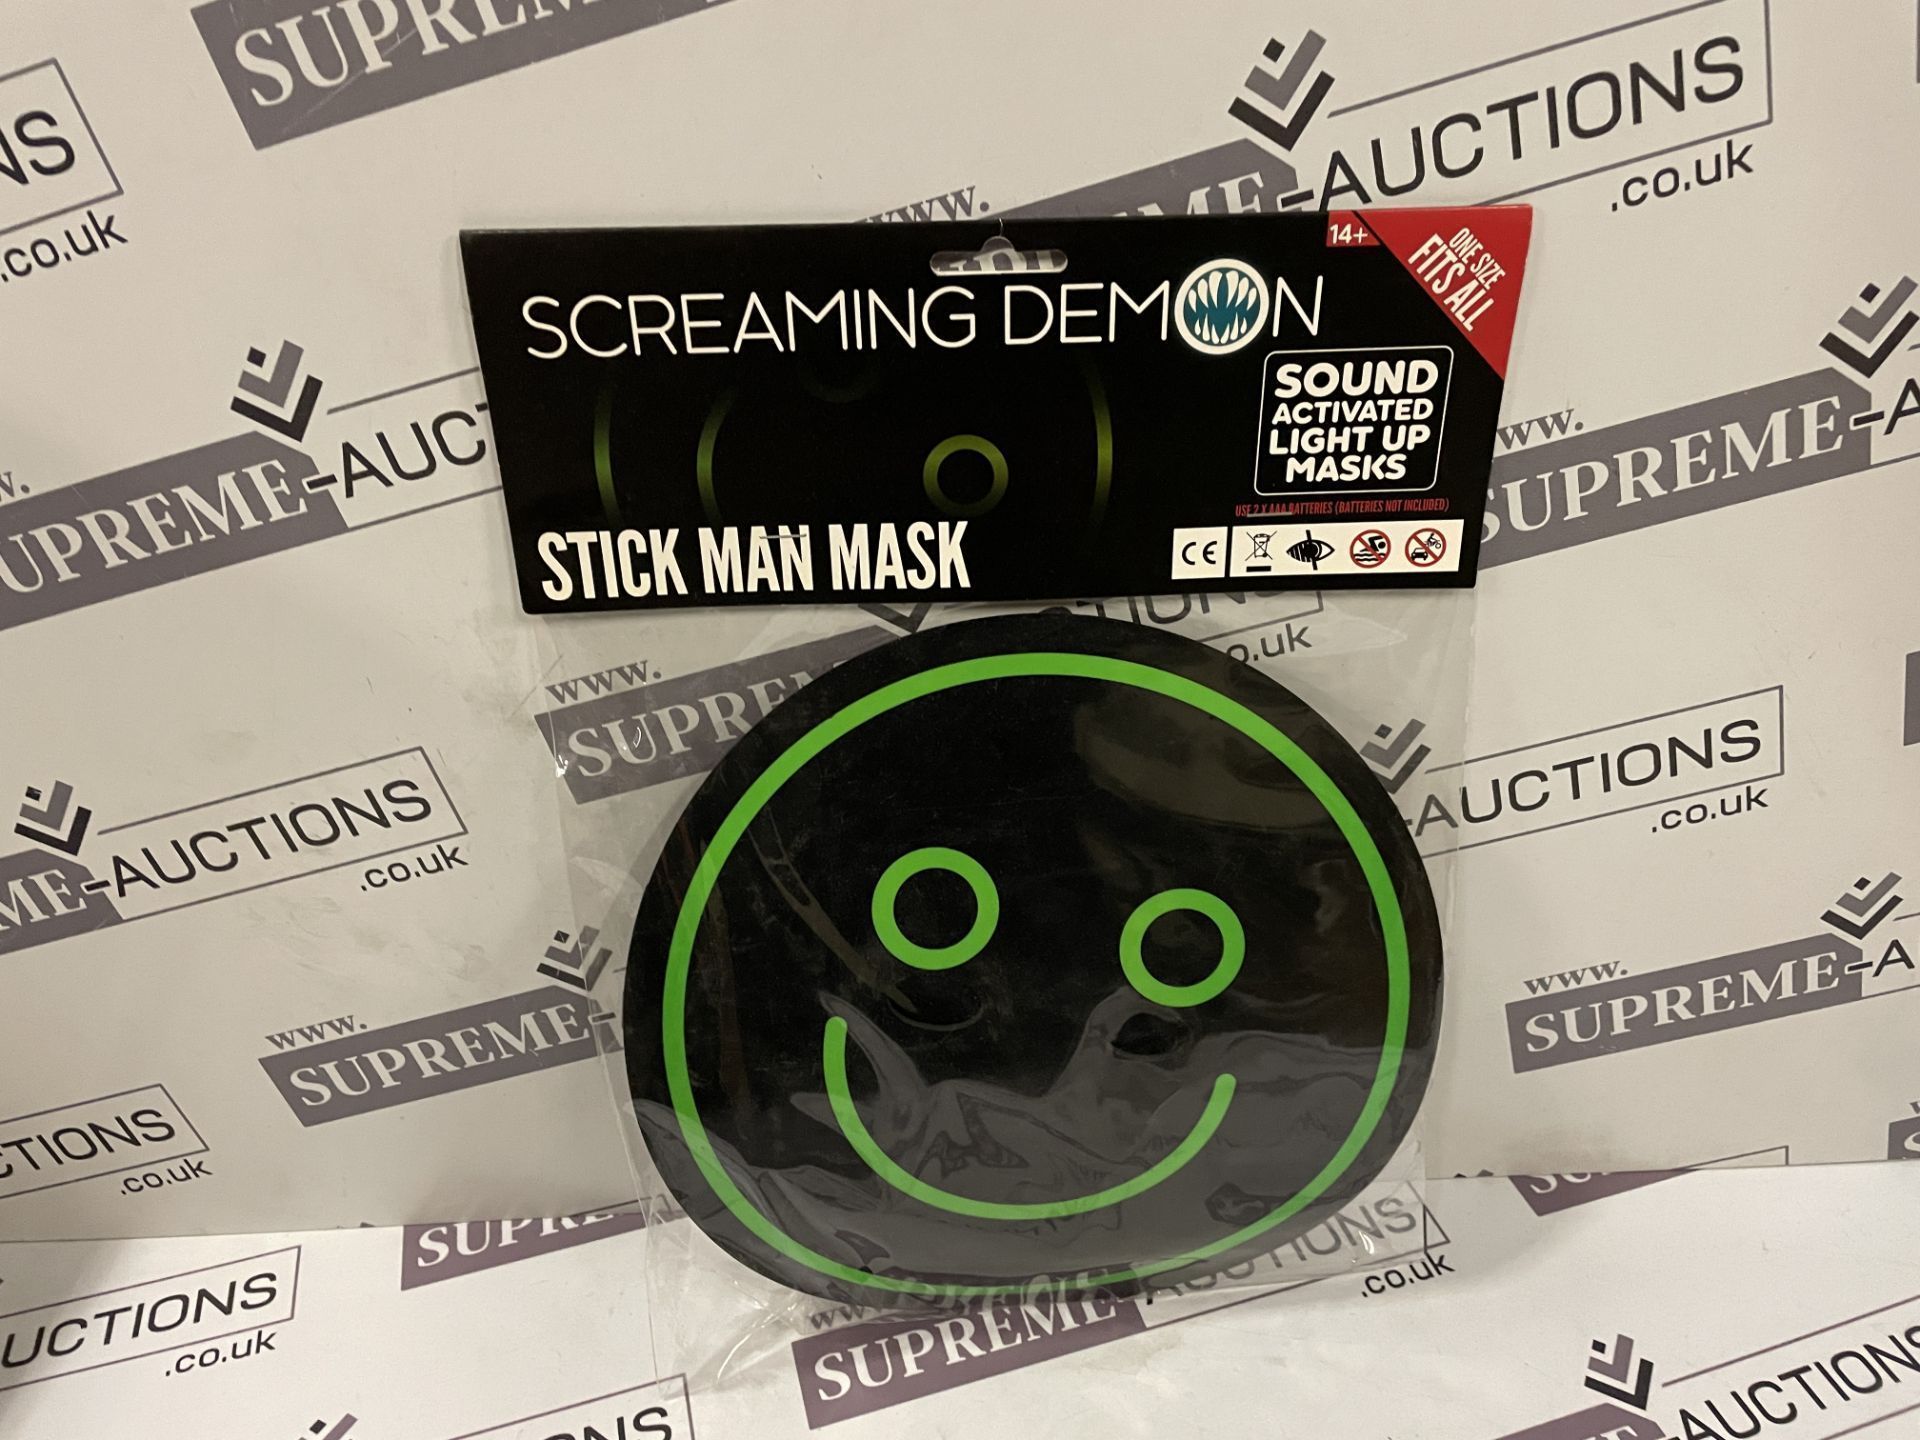 30 X BRAND NEW ASSORTED SCREAMING DEMON EMOJI SOUND ACTIVATED LIGHT UP MASKS RRP £39 EACH R19.2